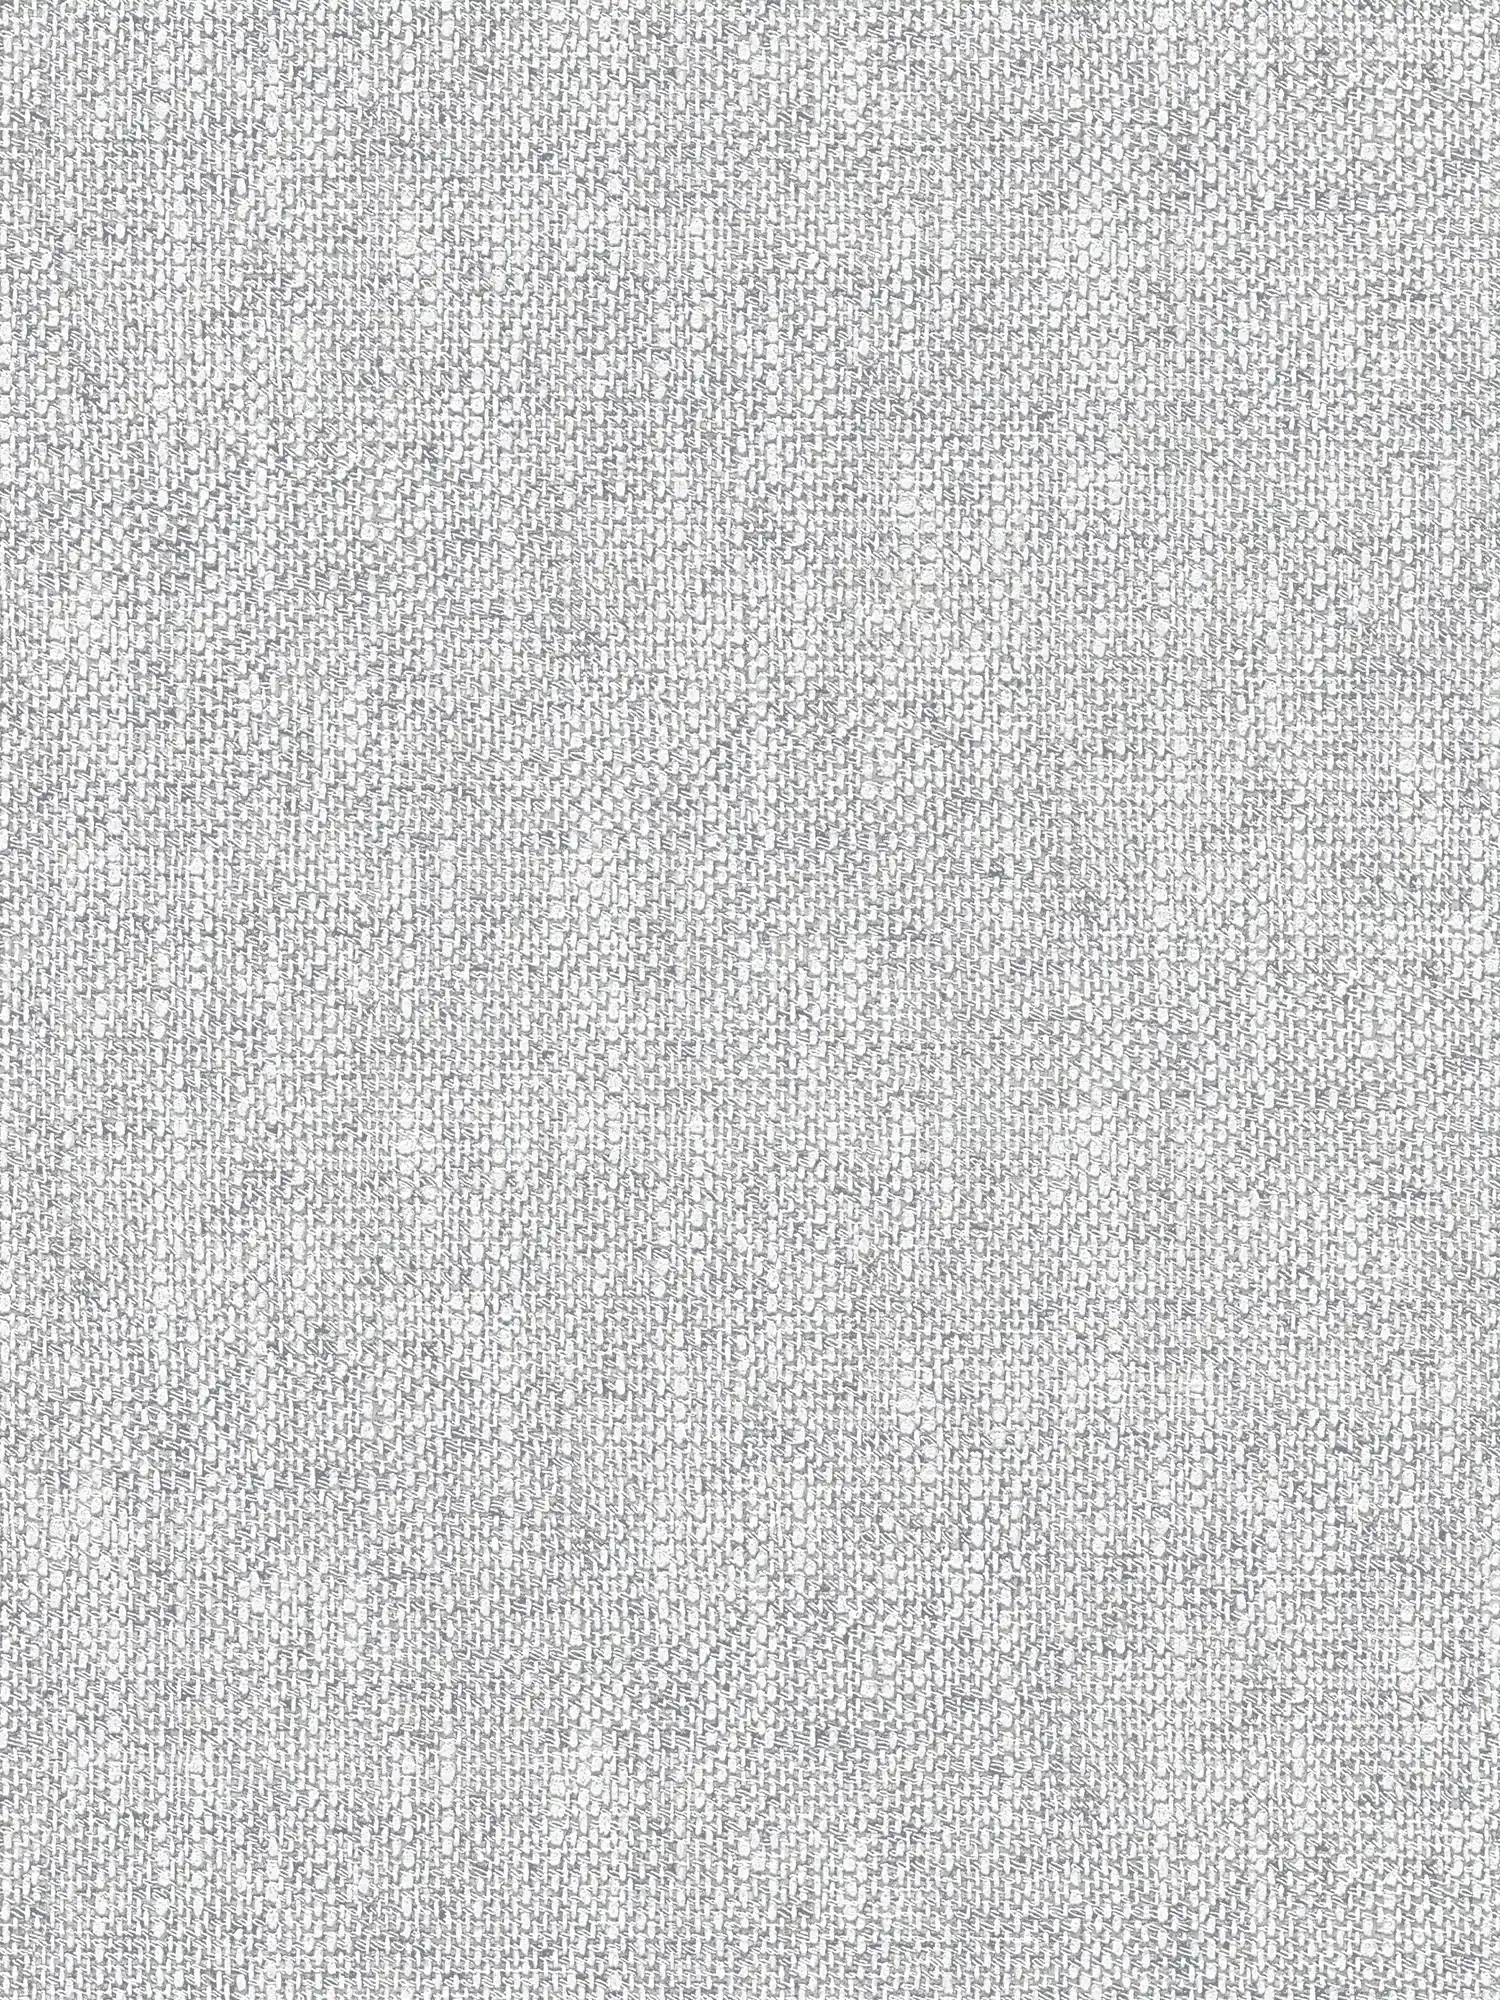 Non-woven wallpaper with realistic fabric look - grey, white
